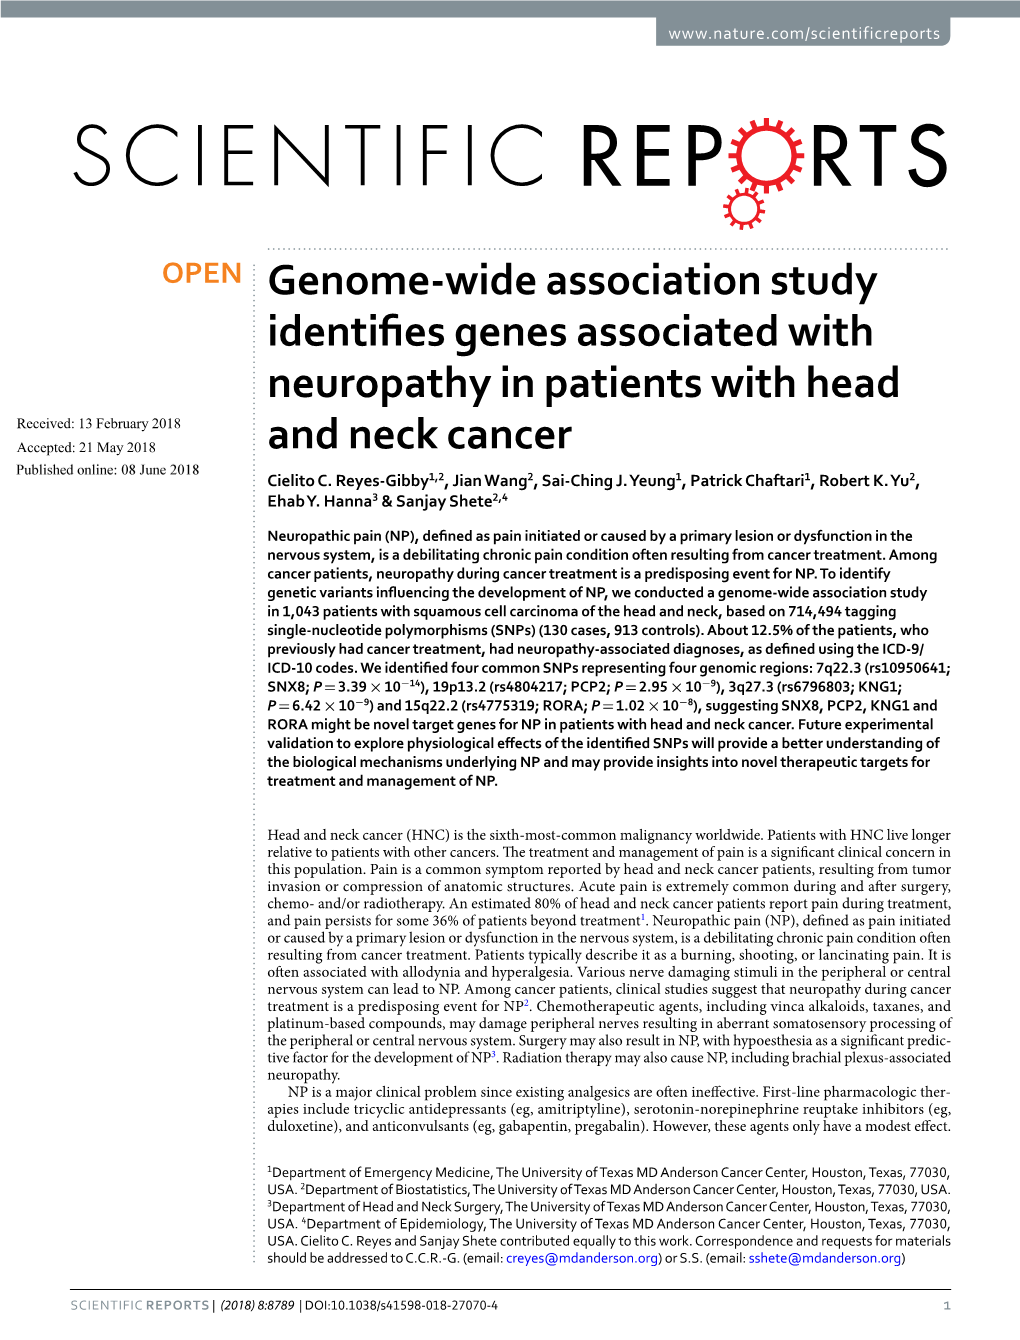 Genome-Wide Association Study Identifies Genes Associated with Neuropathy in Patients with Head and Neck Cancer